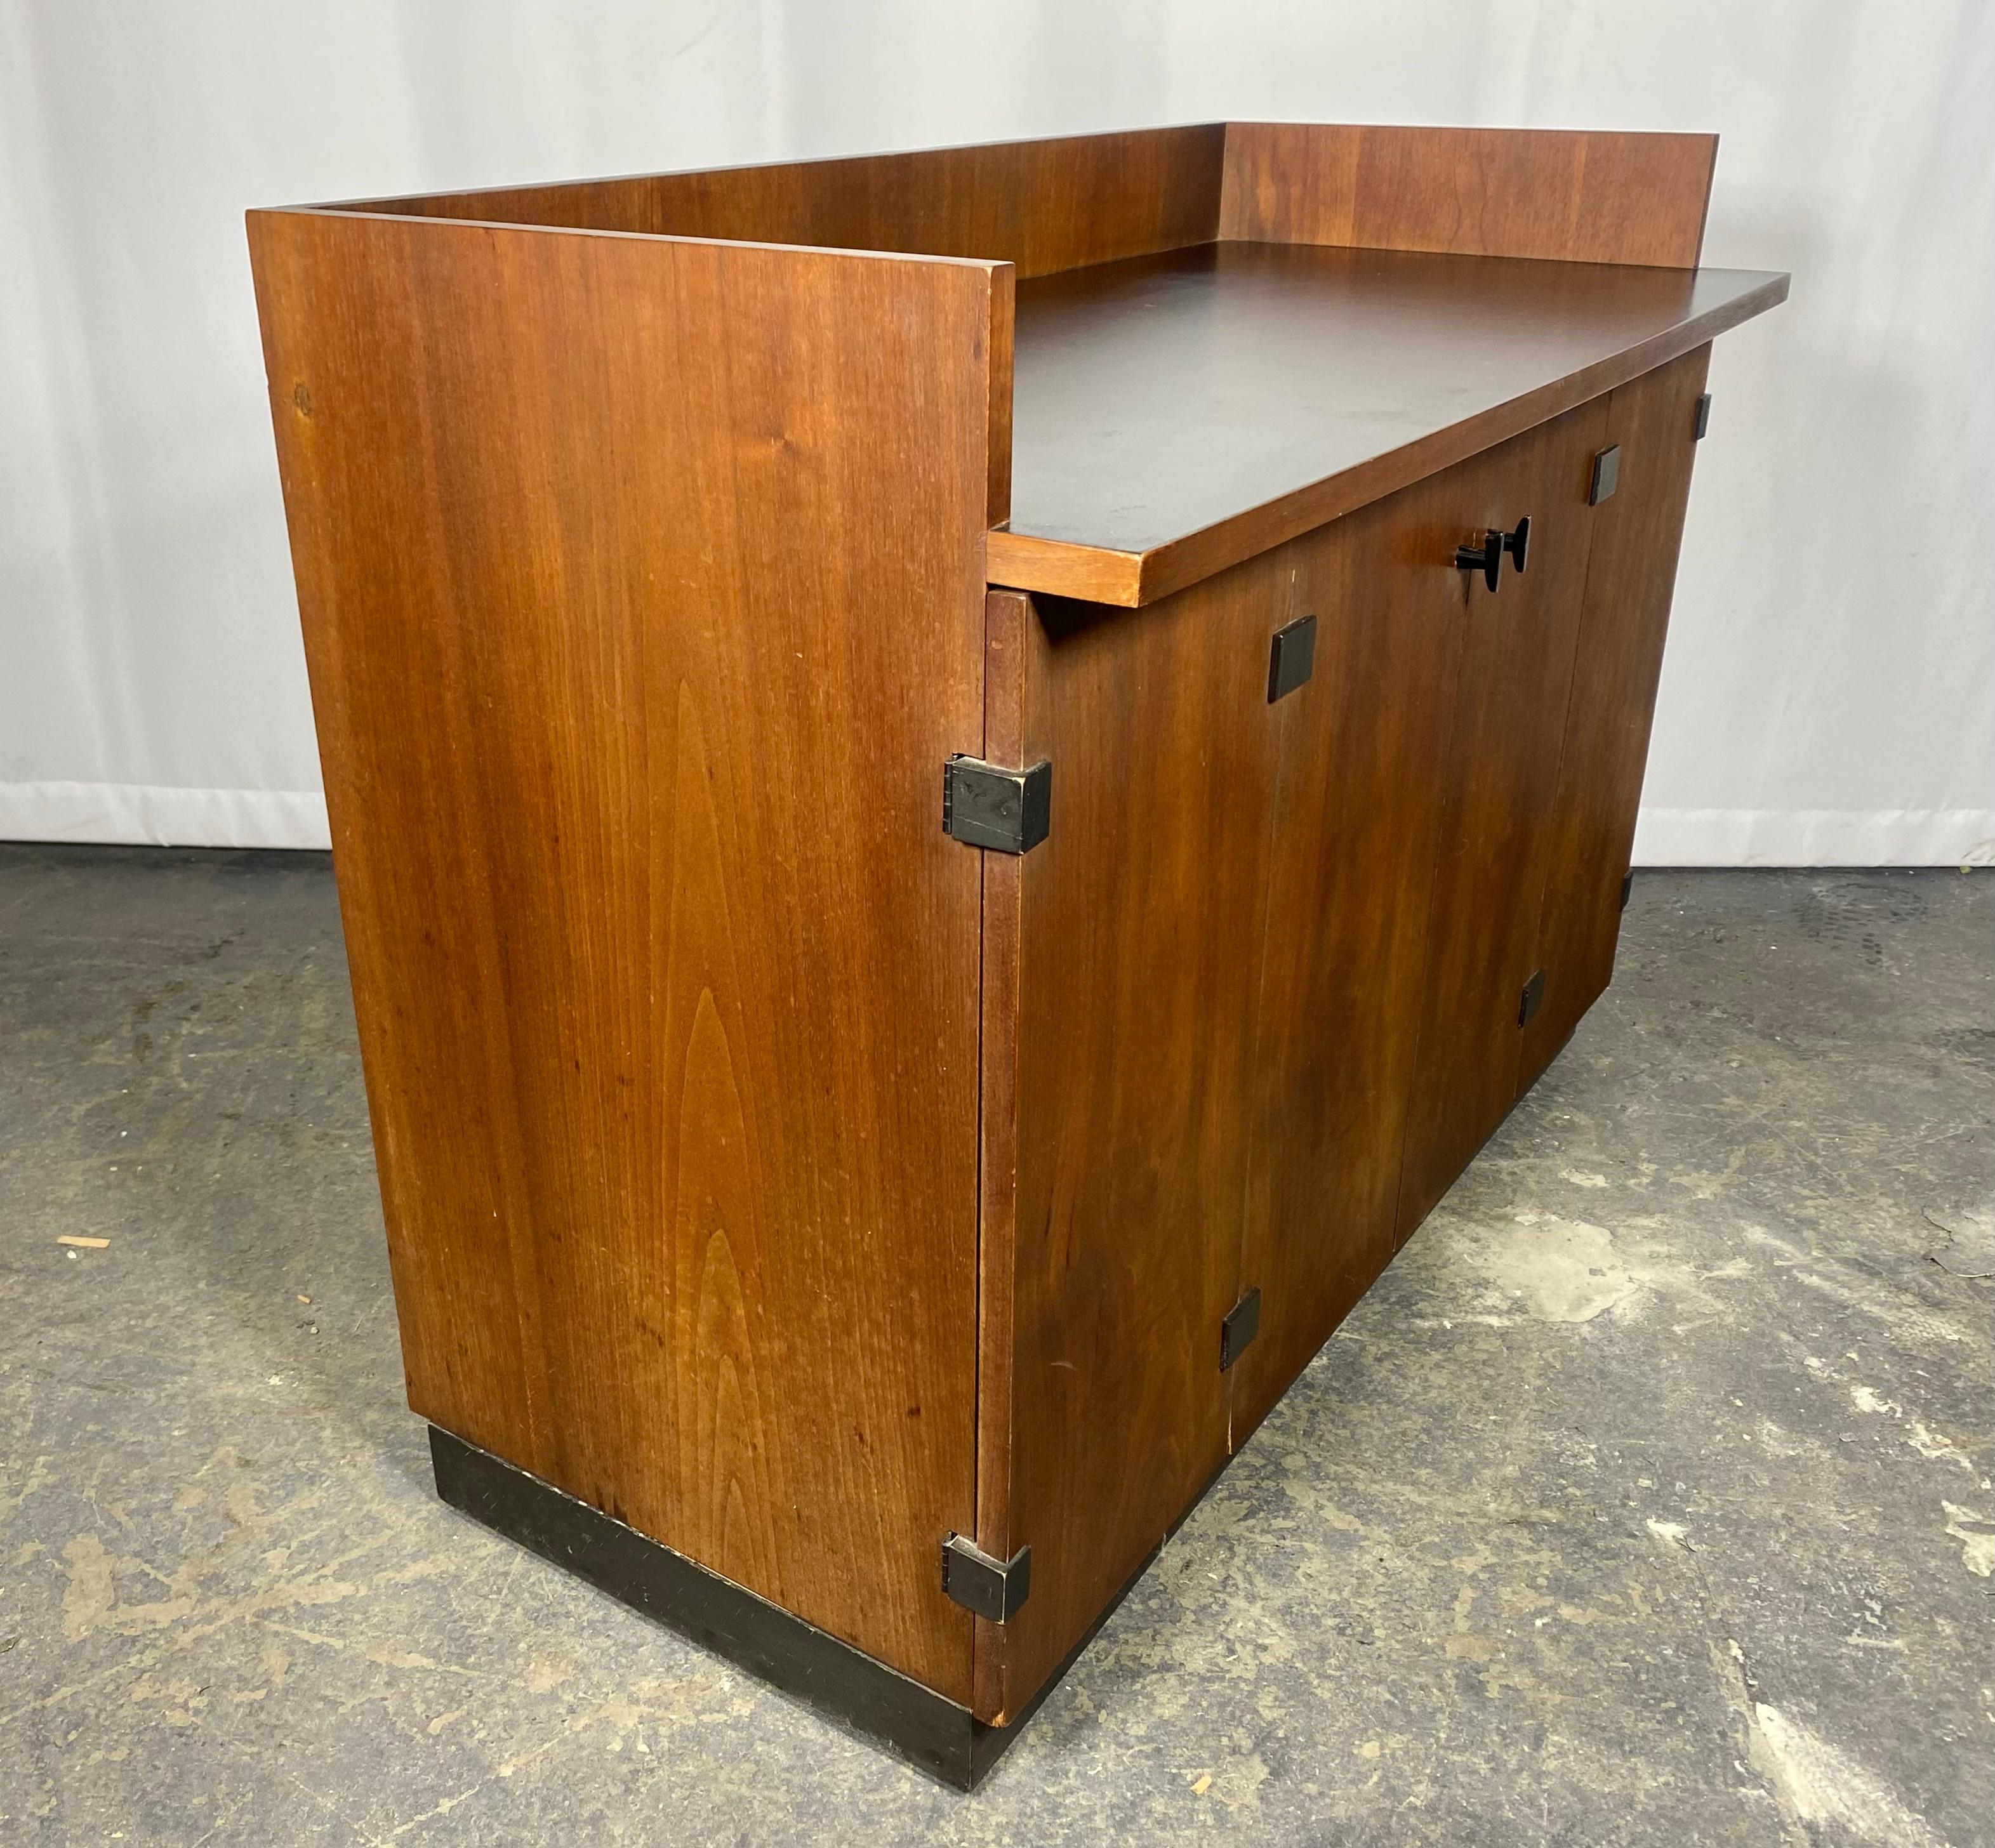 This walnut bar cabinet was manufactured by Directional in the 1960s and attributed to both Milo Baughman and Kipp Stewart due to stylistic attributes associated with both designers, but lack of source material to support. Most commonly credited to